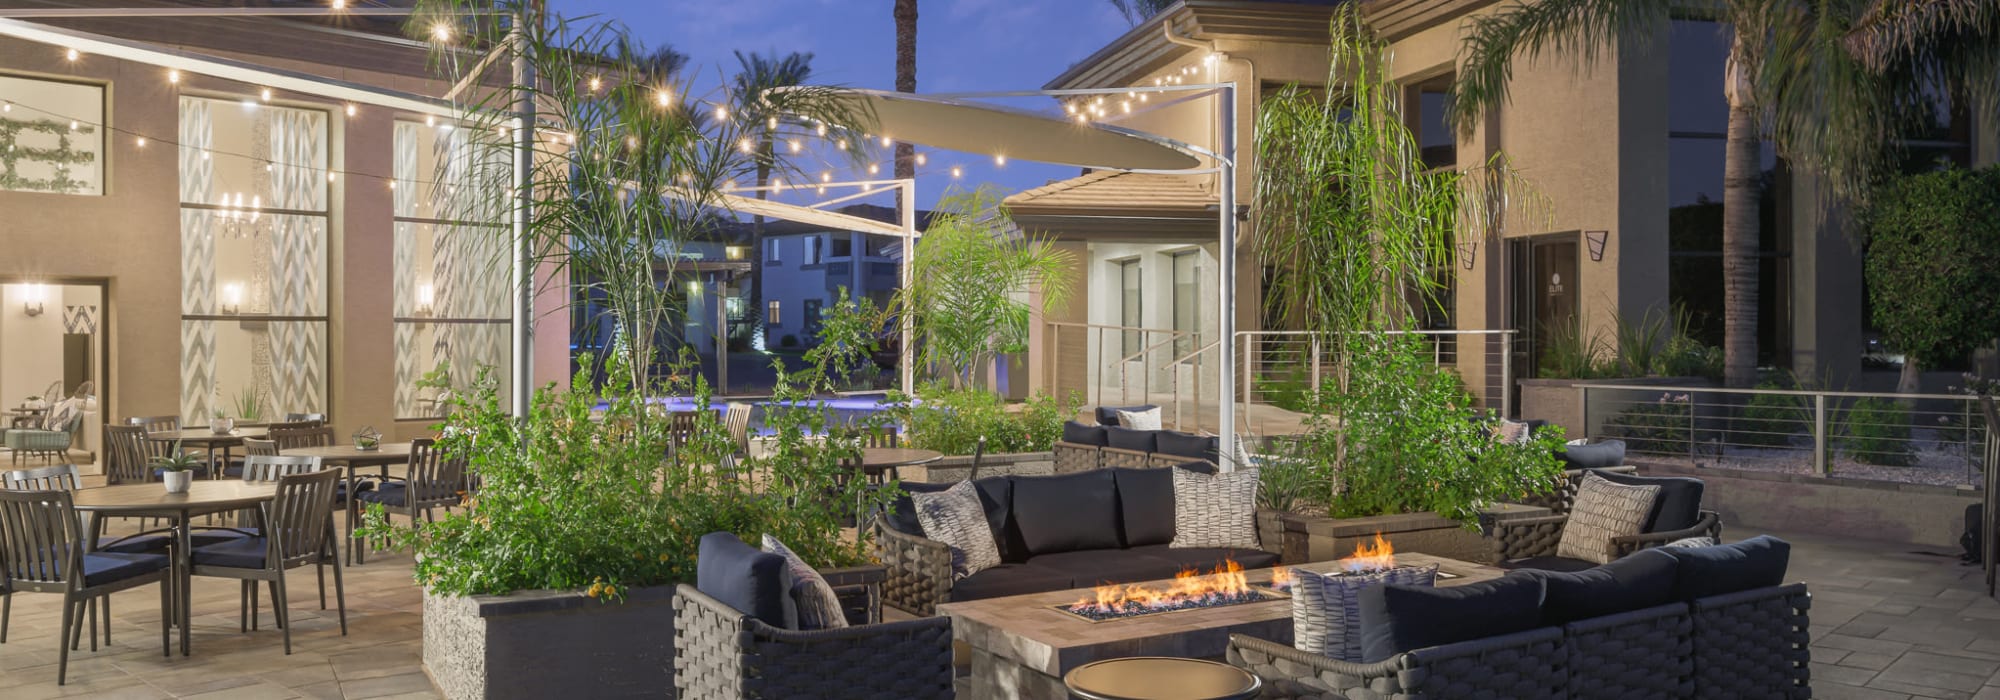 Outside courtyard area where you hang out around the firepit at Elite North Scottsdale in Scottsdale, Arizona